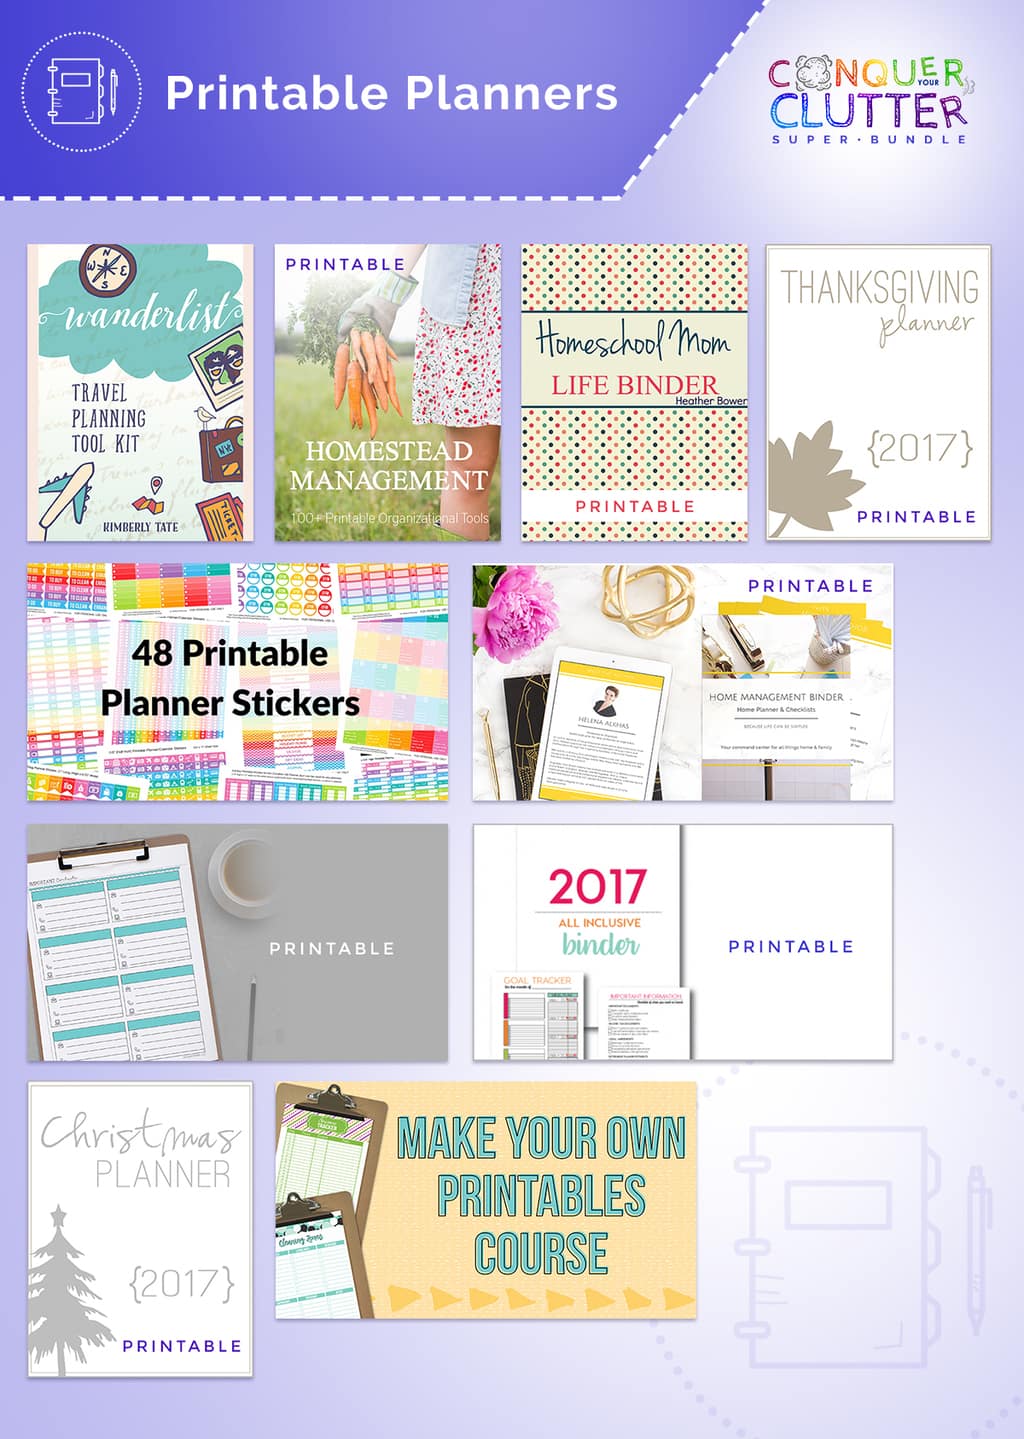 graphics of the covers of what's available in the Printable Planners section of the Conquer Your Clutter Super Bundle